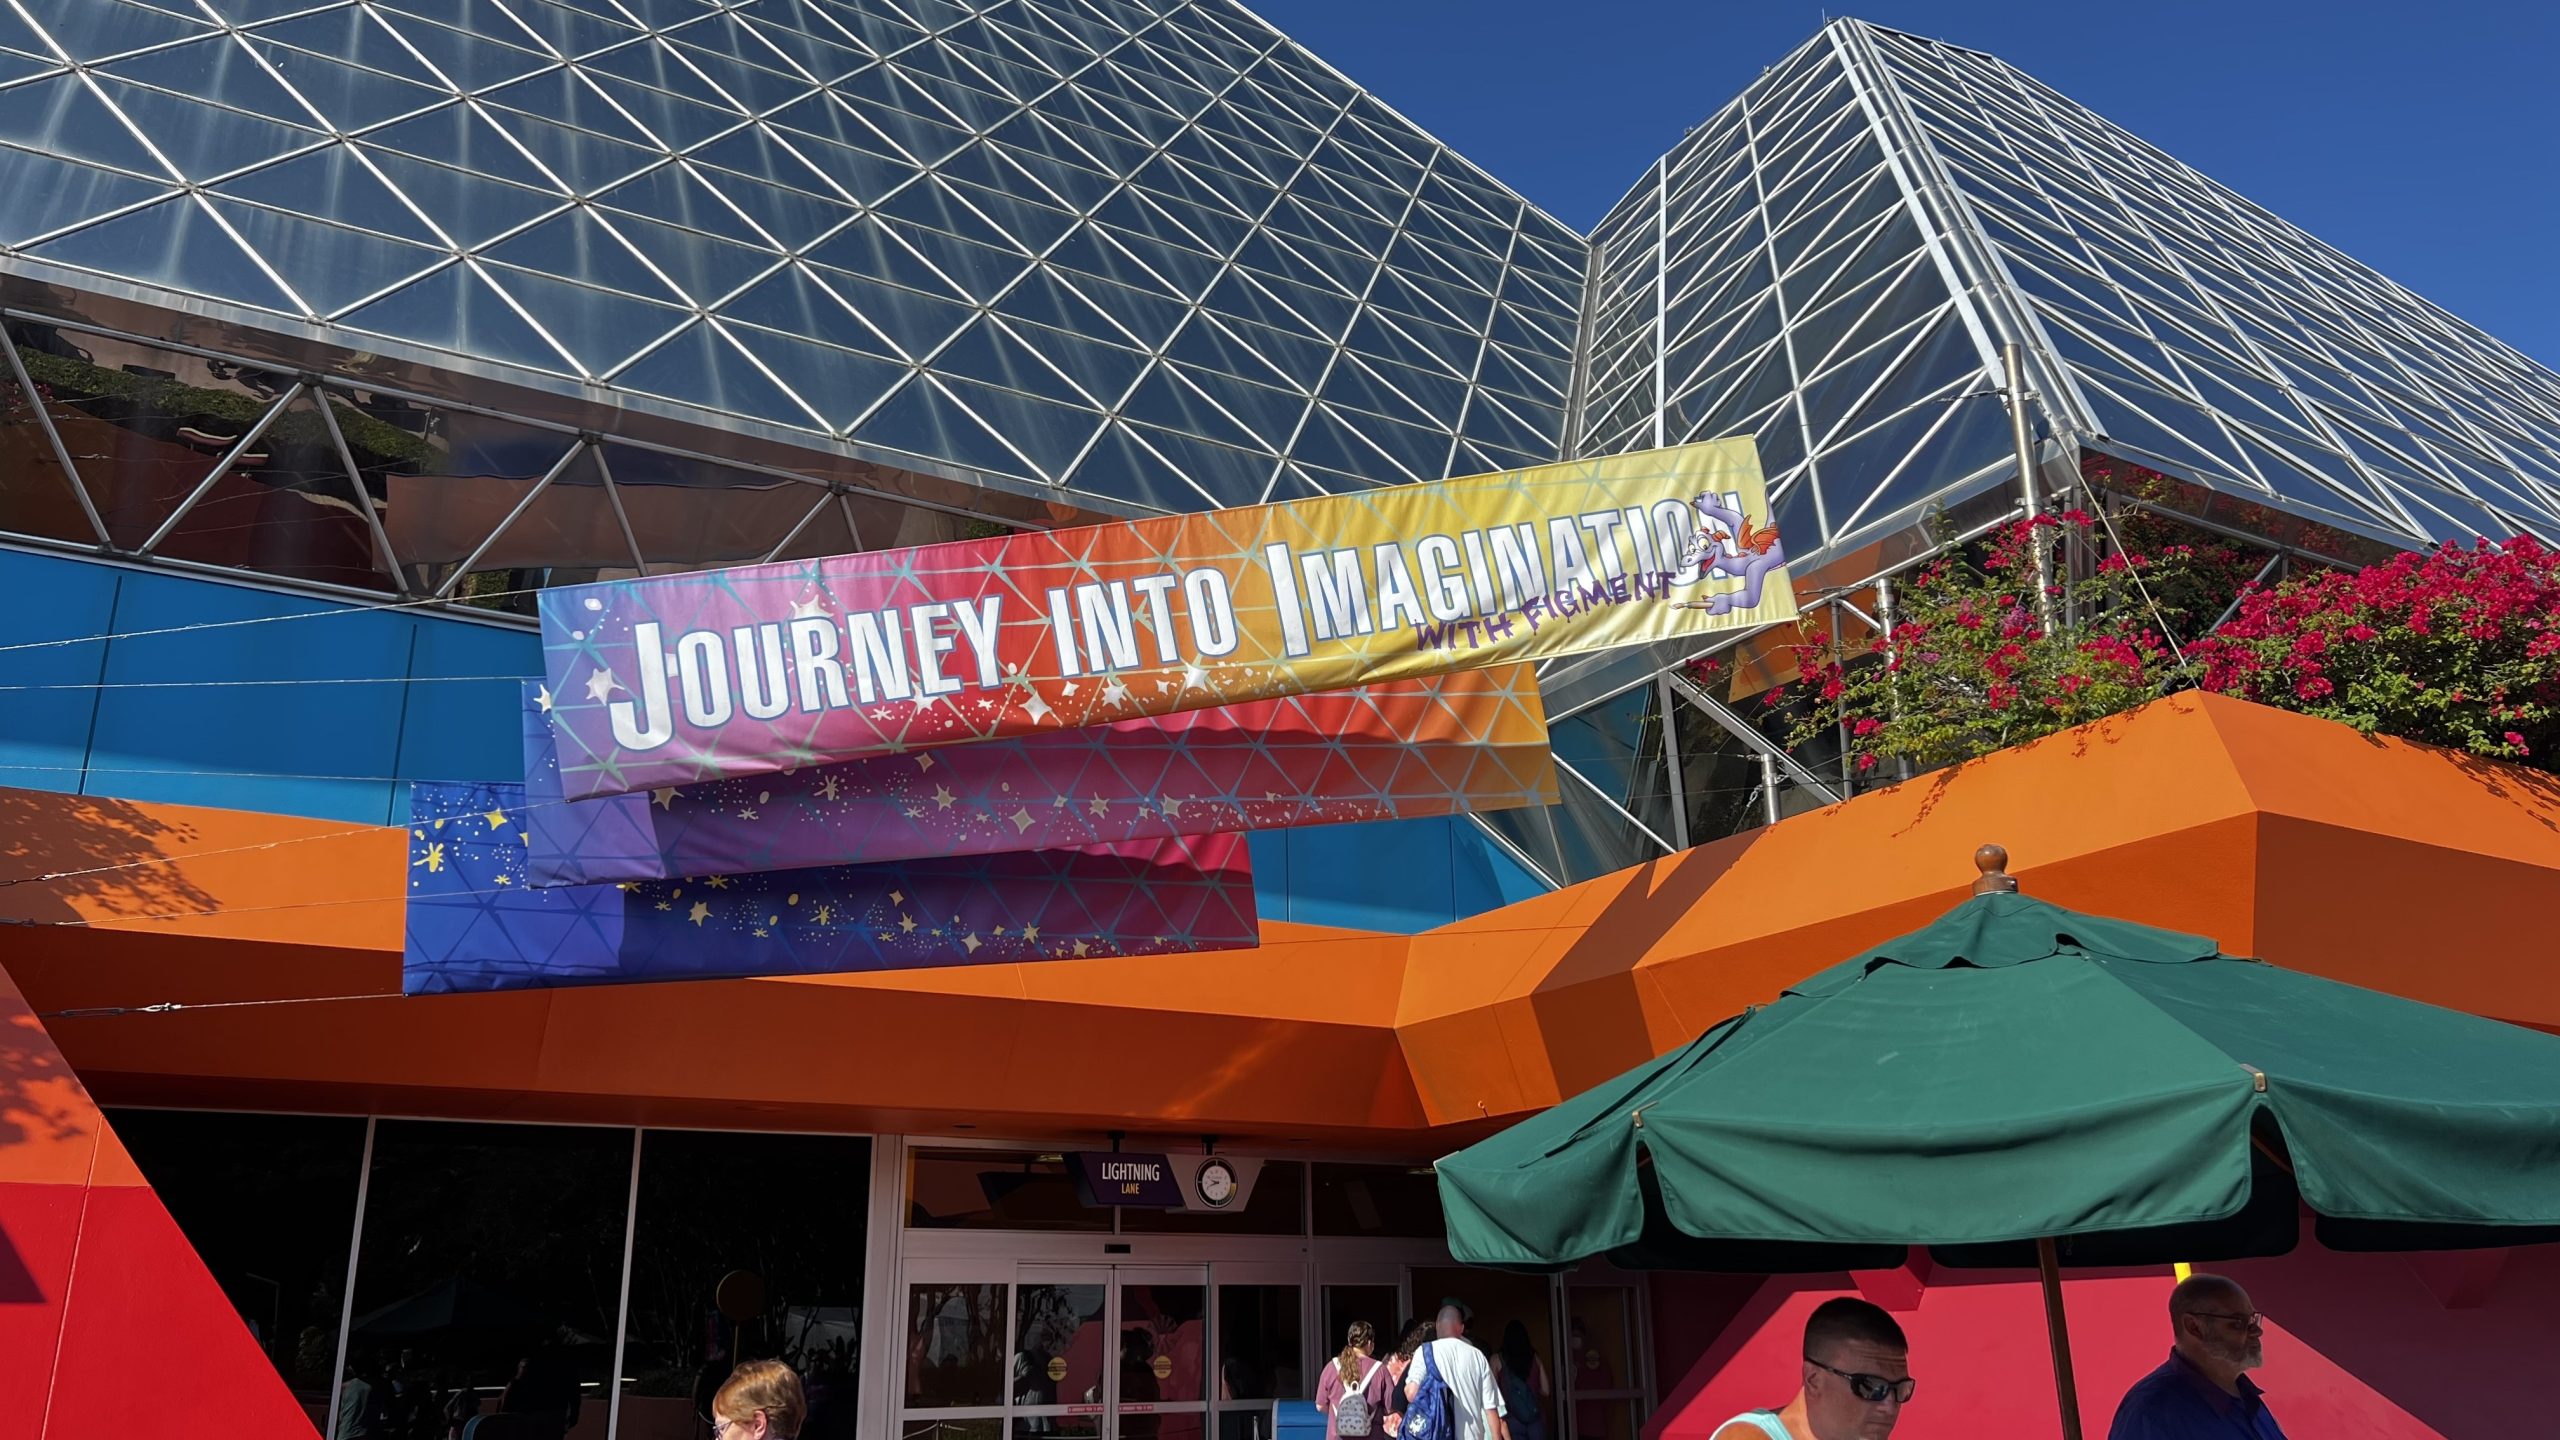 the journey into imagination